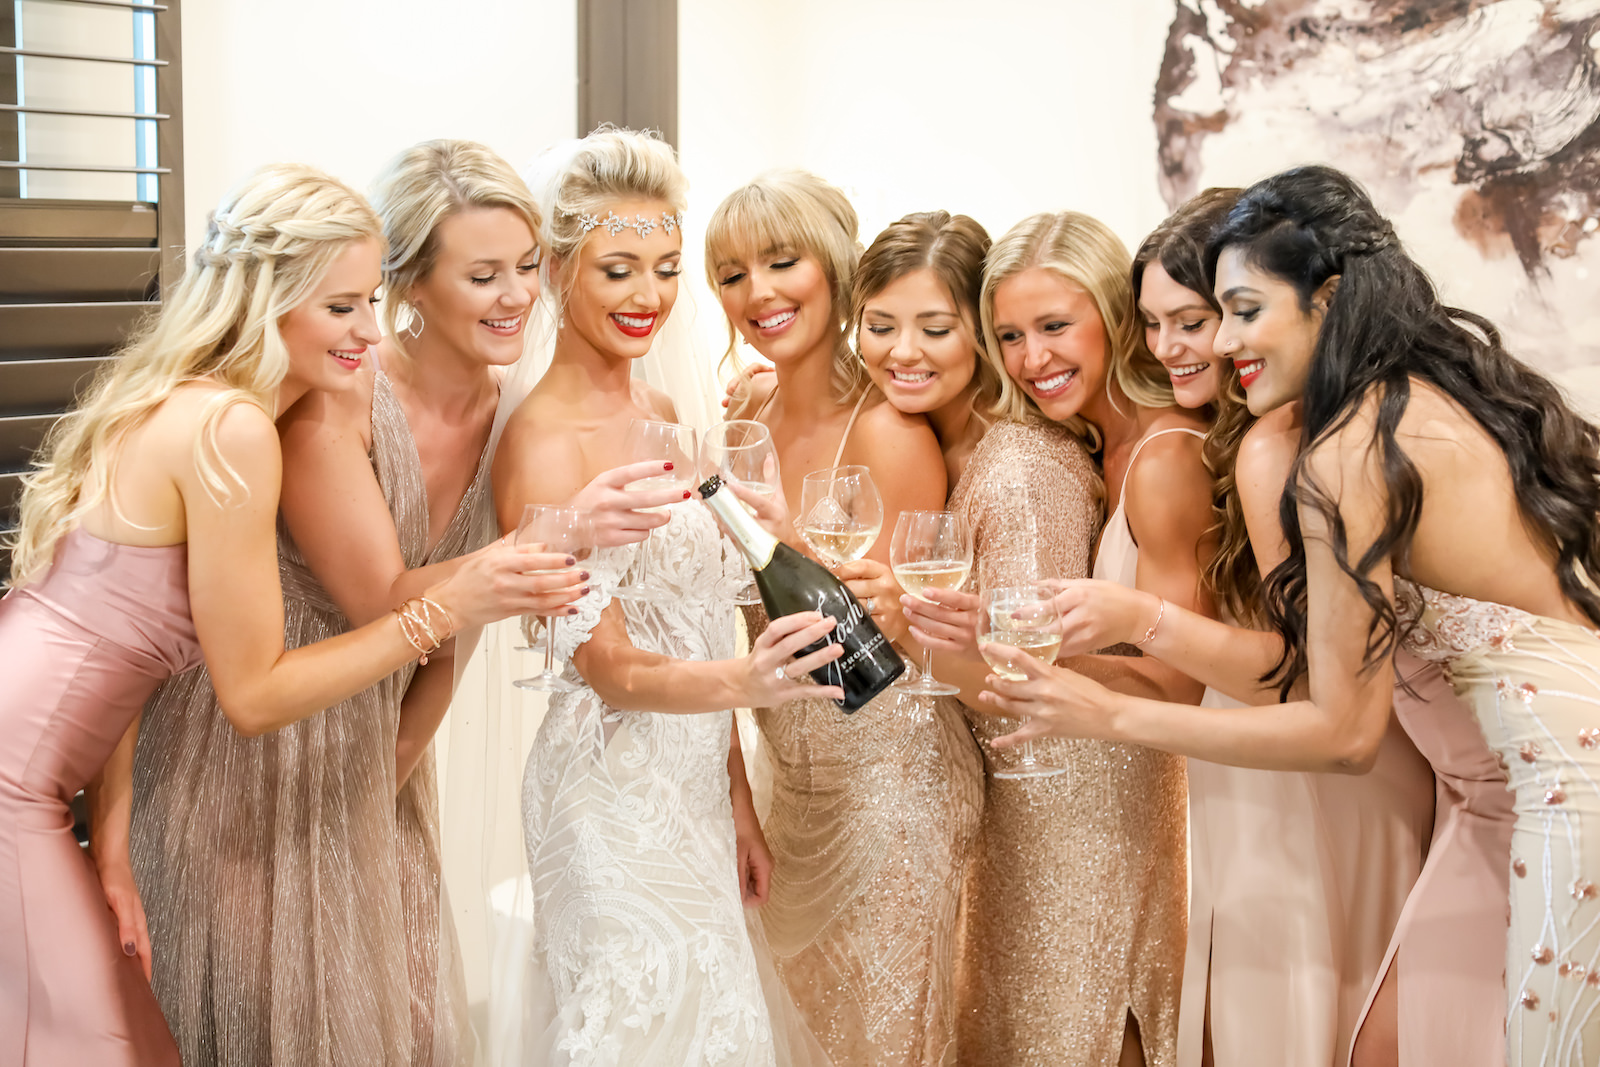 Vintage Inspired Florida Bride with Bridesmaids Popping Champagne in Mismatched 1920's Glamour Long Dresses Bride Wearing Crystal Headband with Veil, Off the Shoulder Lace Wedding Dress | Sarasota Wedding Planner Kelly Kennedy Weddings | Tampa Bay Wedding Photographer Lifelong Photography Studio